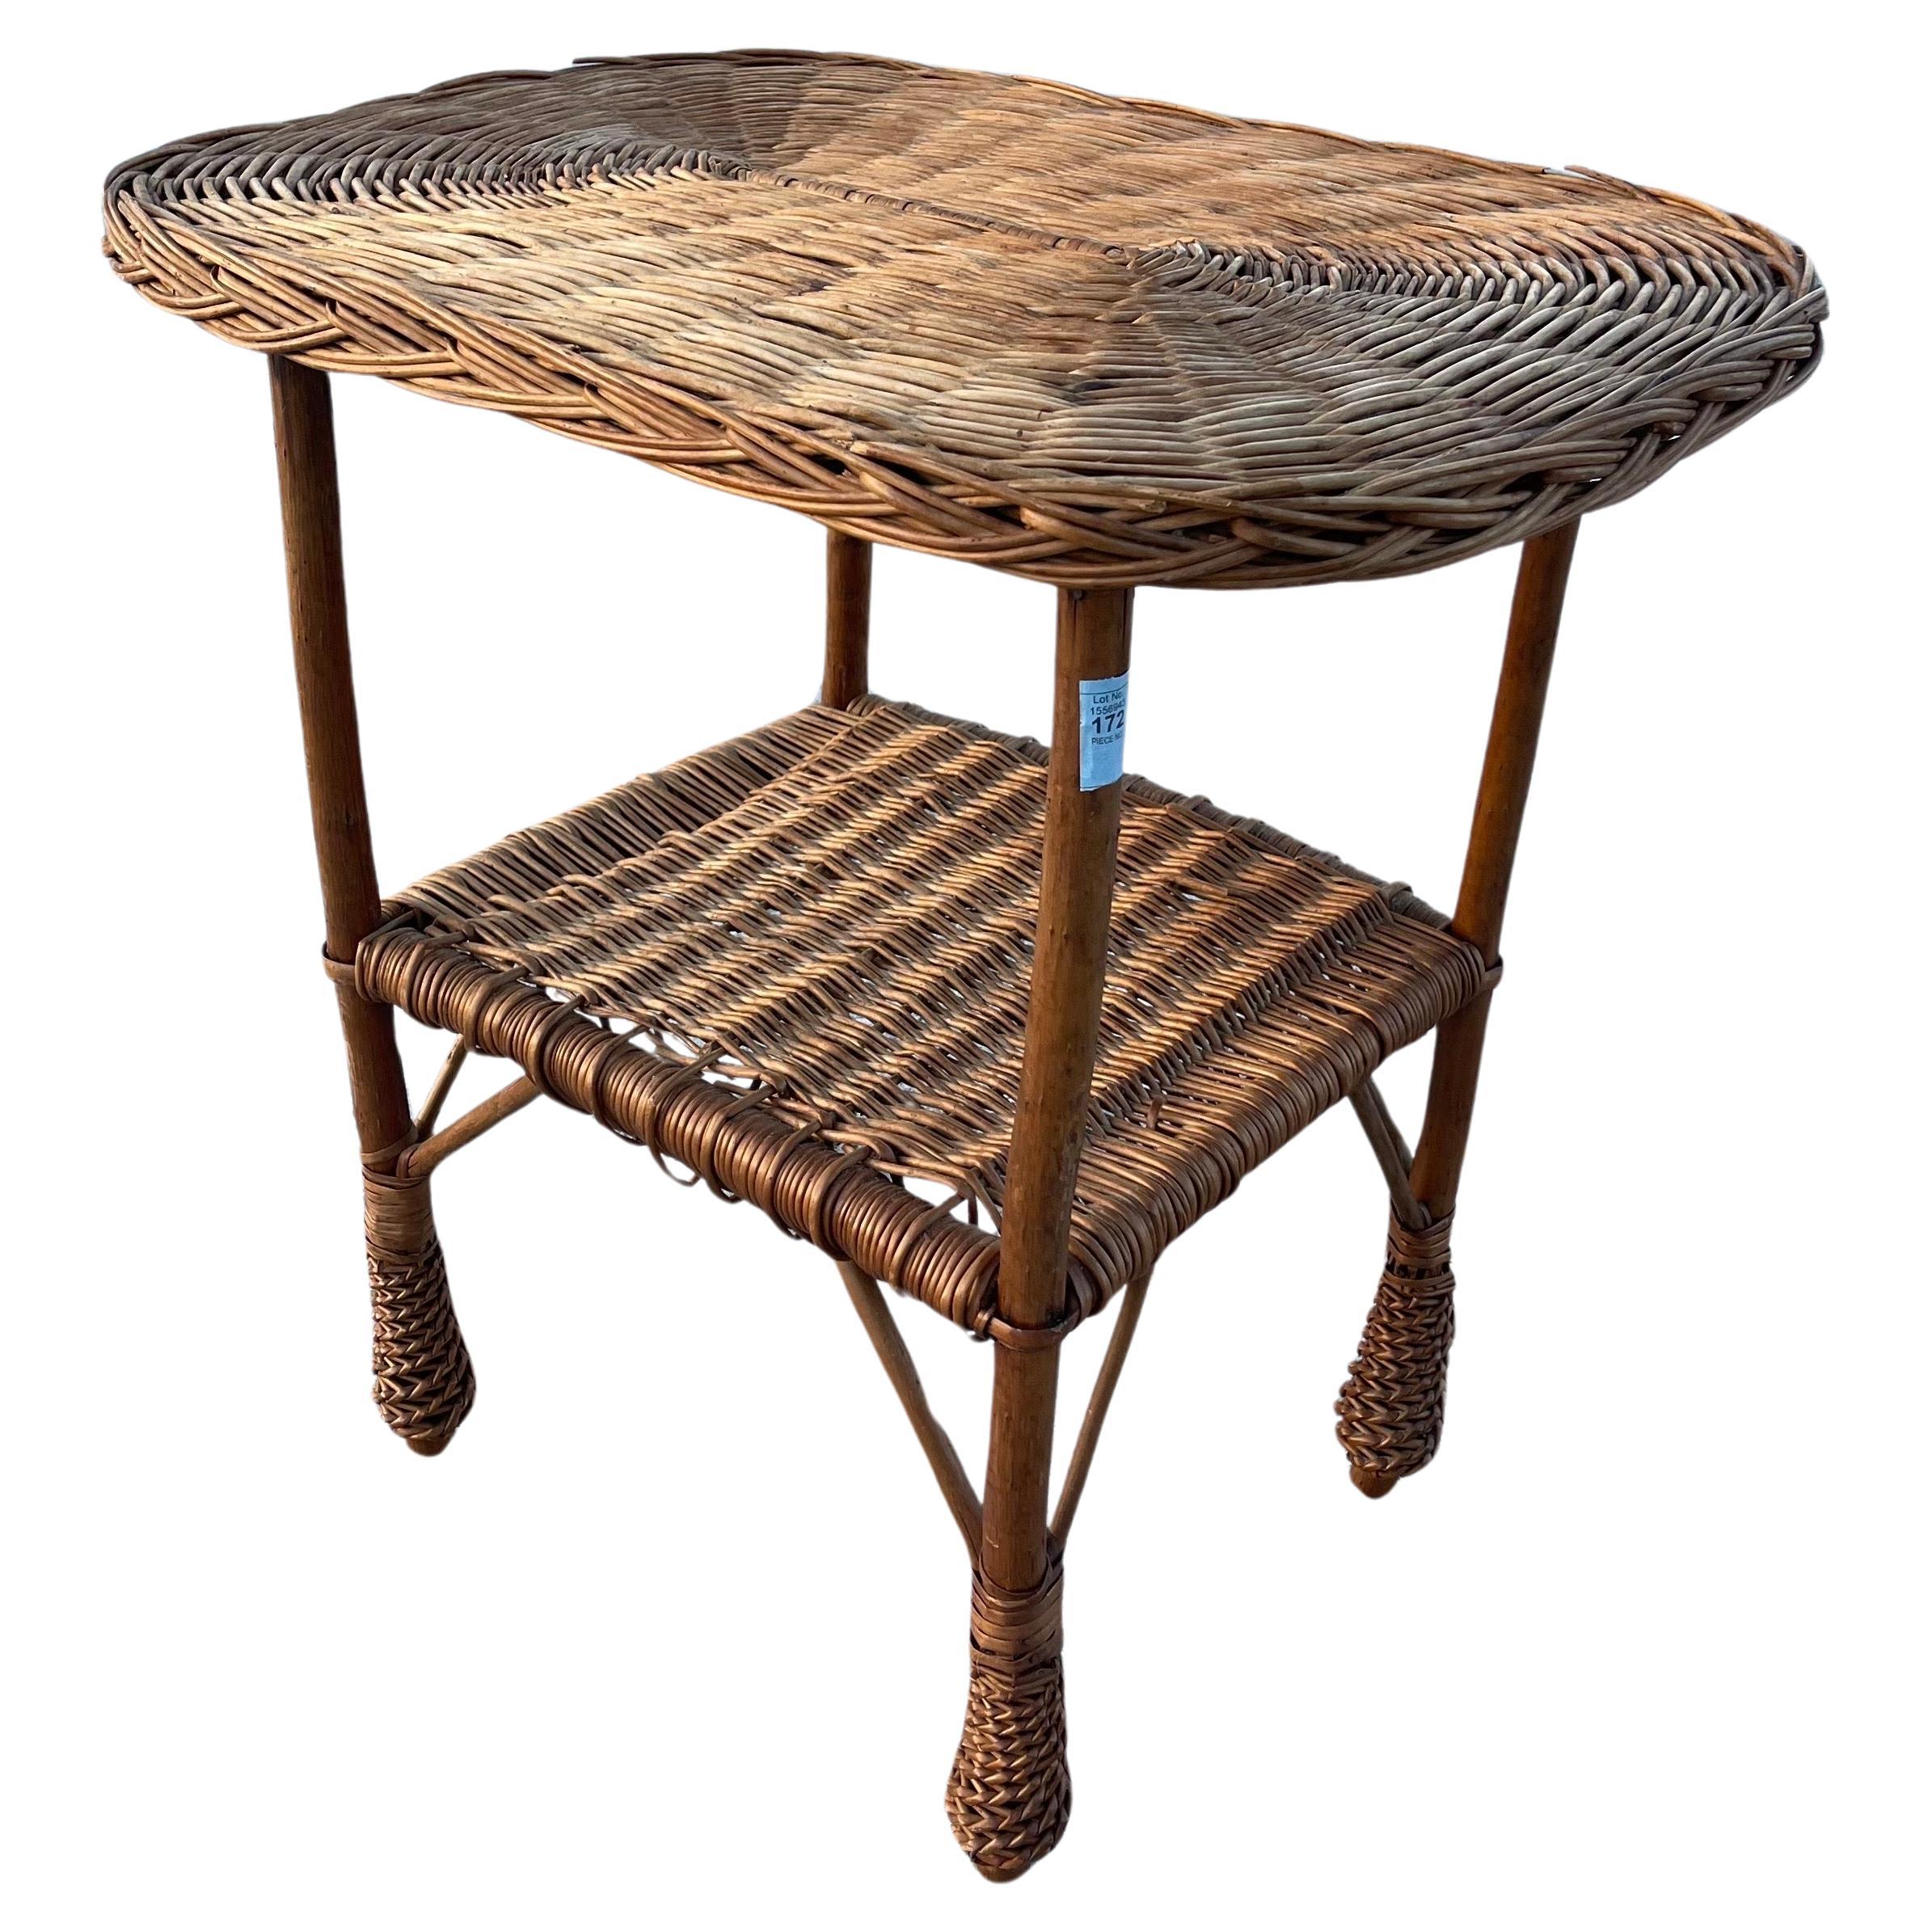 Mid-20th Century Woven Wicker Rattan Side Table For Sale